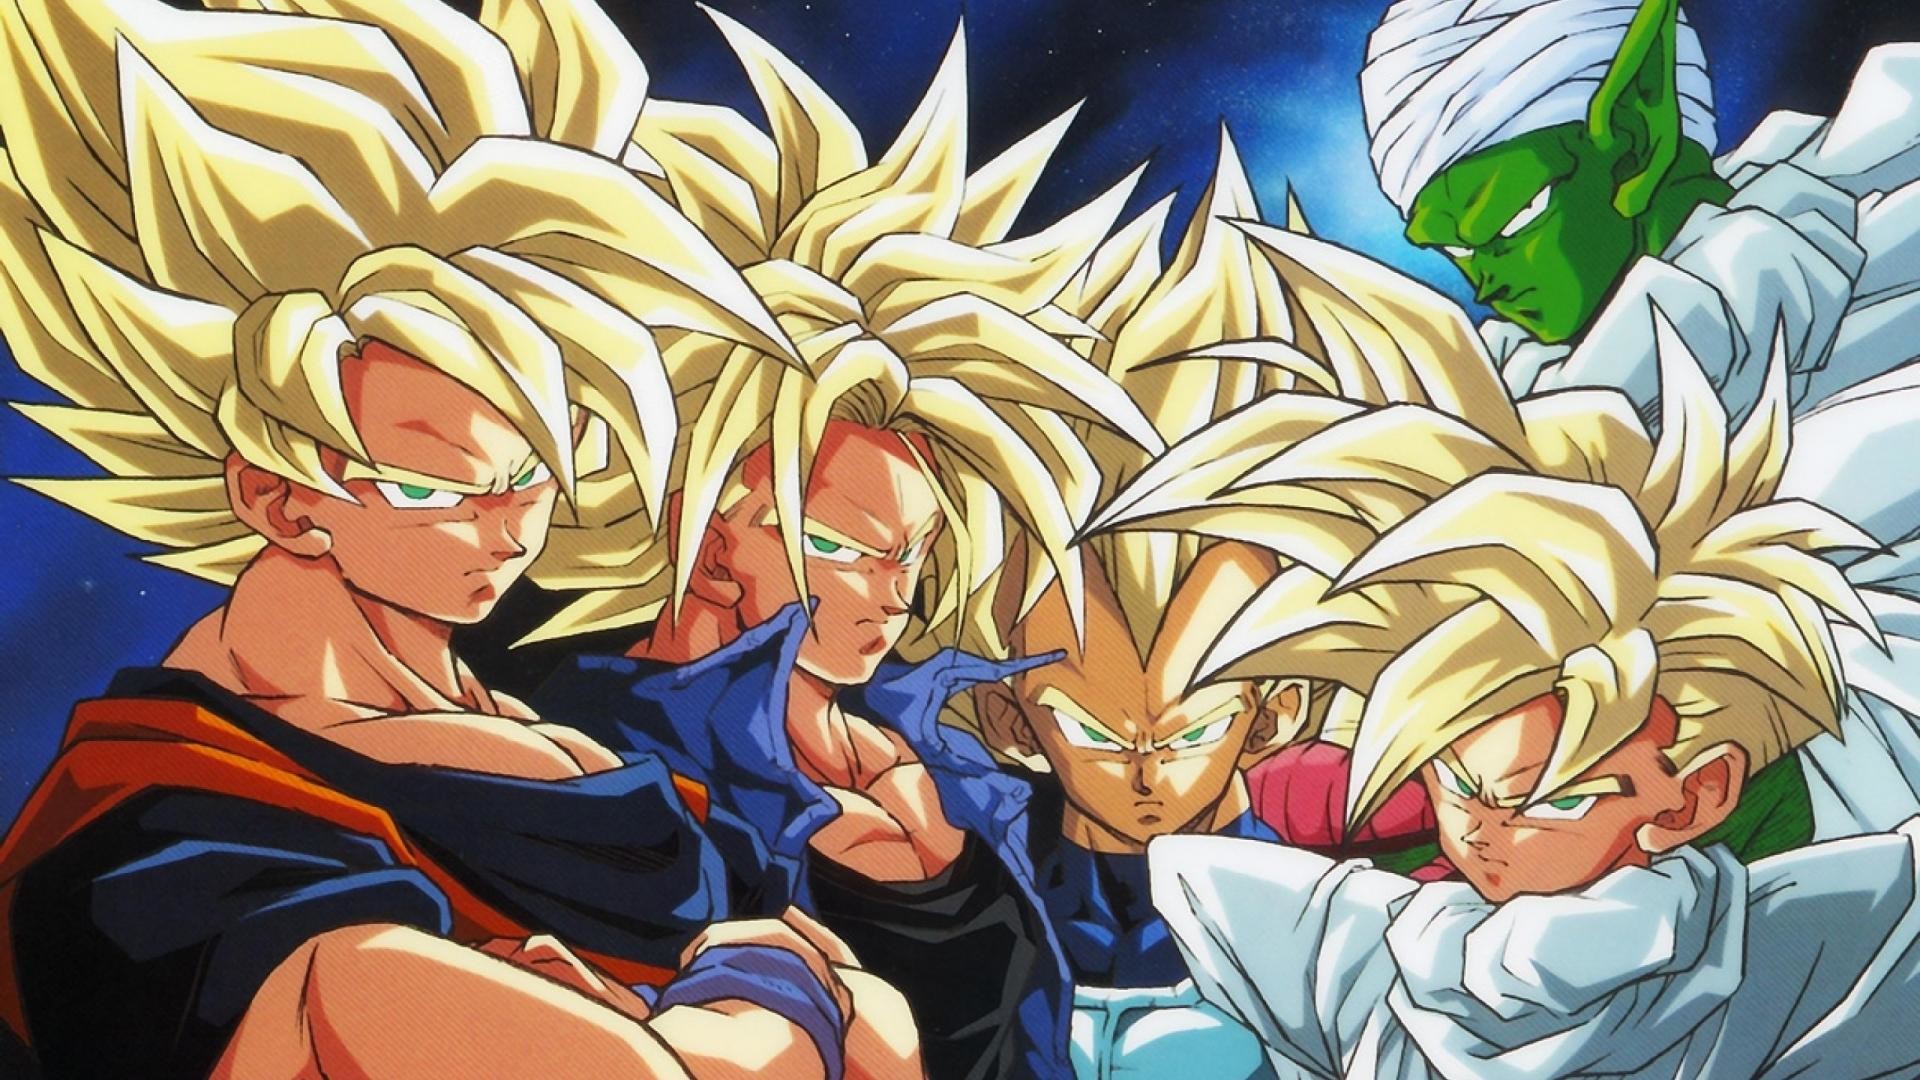 Dragonball fans, get ready for a treat. The team behind Hyper Dragonball Z has released a new update for it